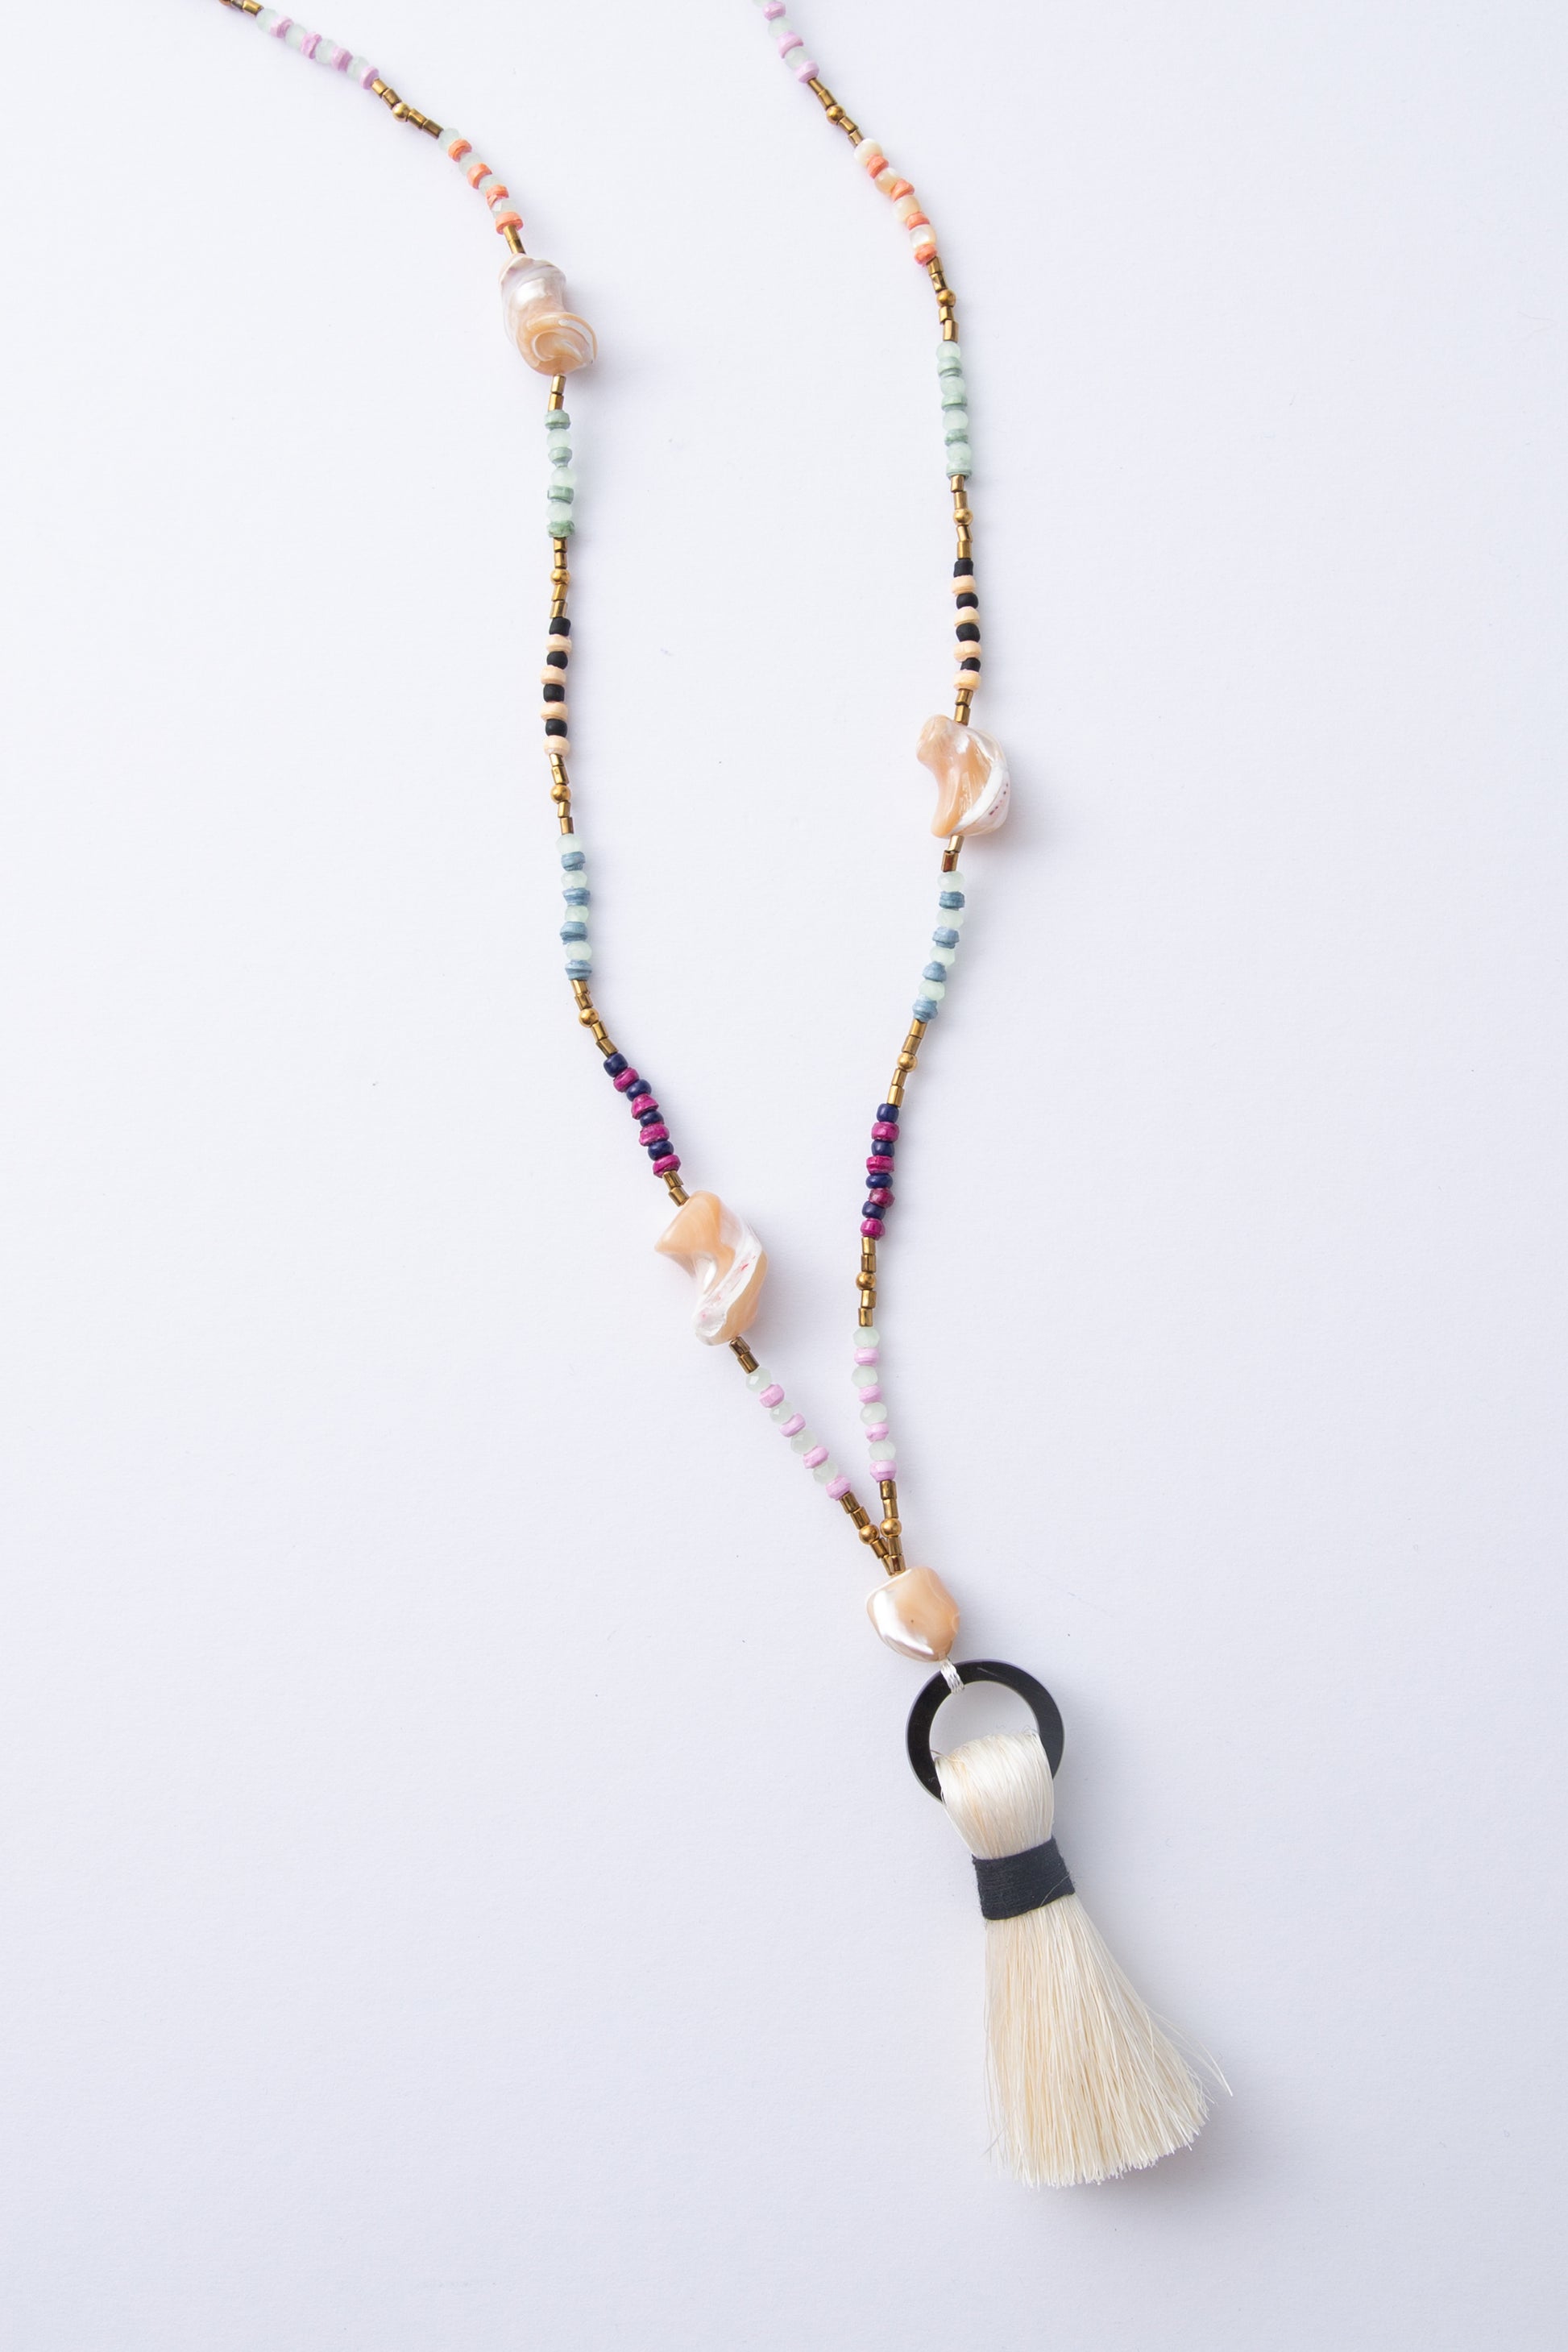 The Dorah Necklace is a lariat-style necklace composed of beads of many different materials and colors. Small paper beads in shades of mint, purple, and cream alternate with small brass beads, glass beads, and large freshwater pearl beads with an irregular, natural shape. At the bottom of the necklace is a horn circle with a cream thread tassel hanging down.